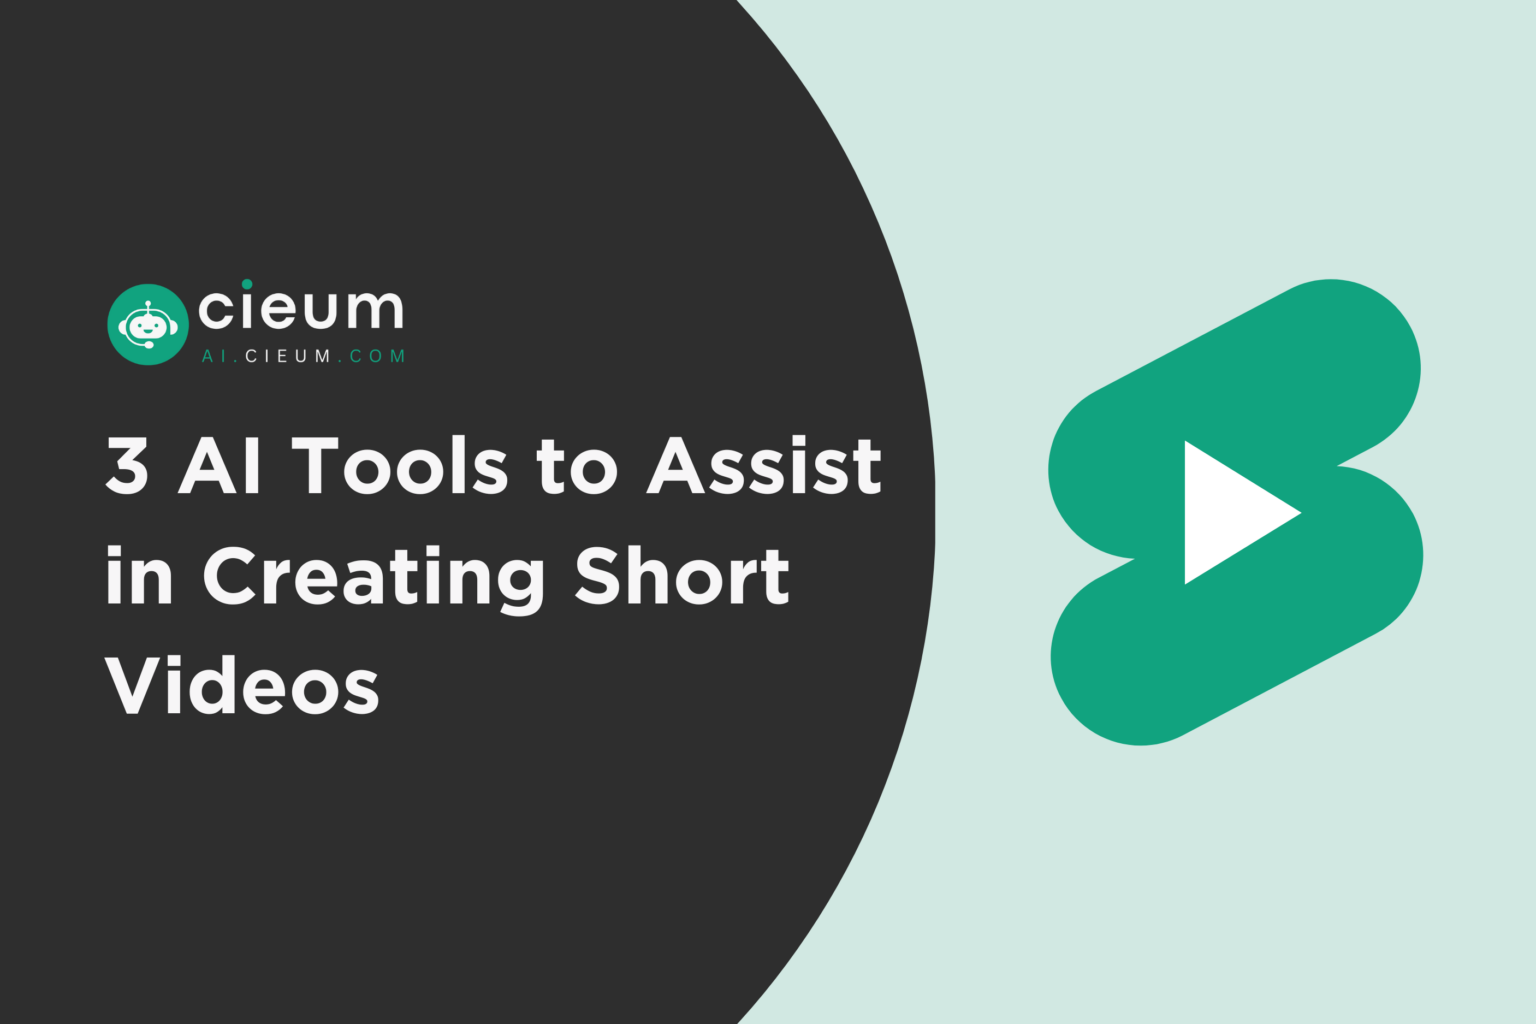 3 AI Tools to Assist in Creating Short Videos